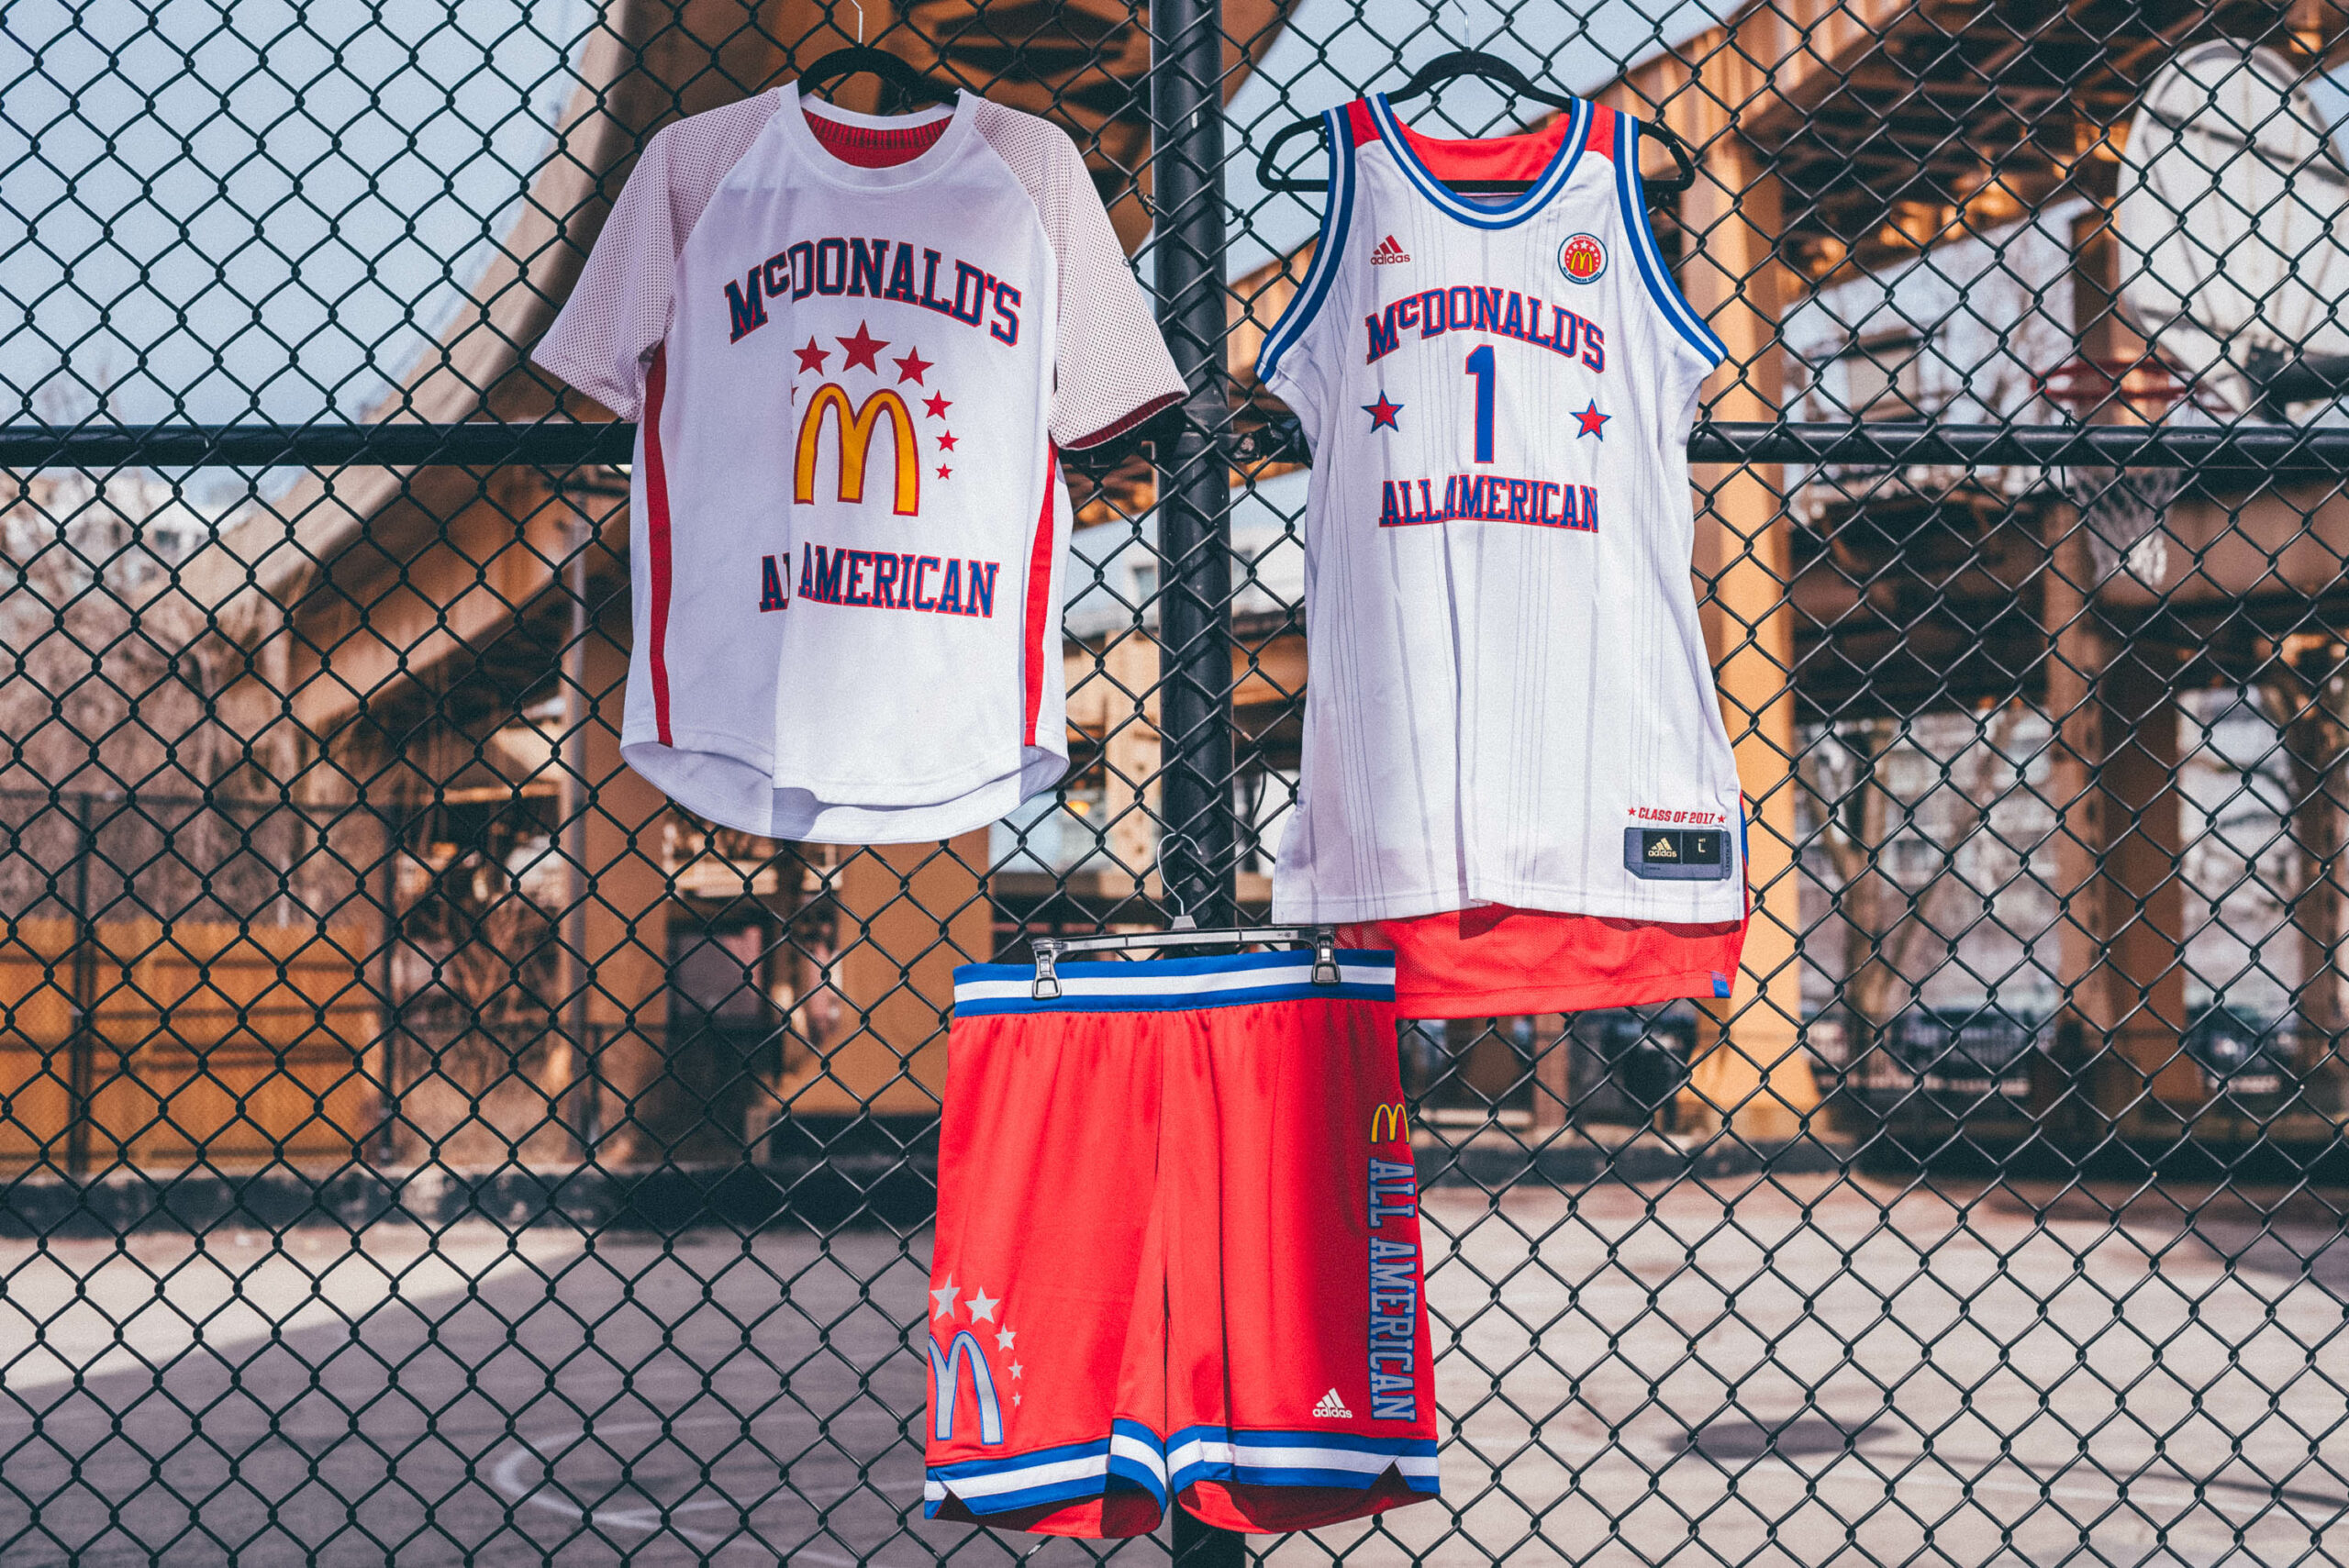 Adidas unveils official jerseys for the 2017 McDonald’s All American Games